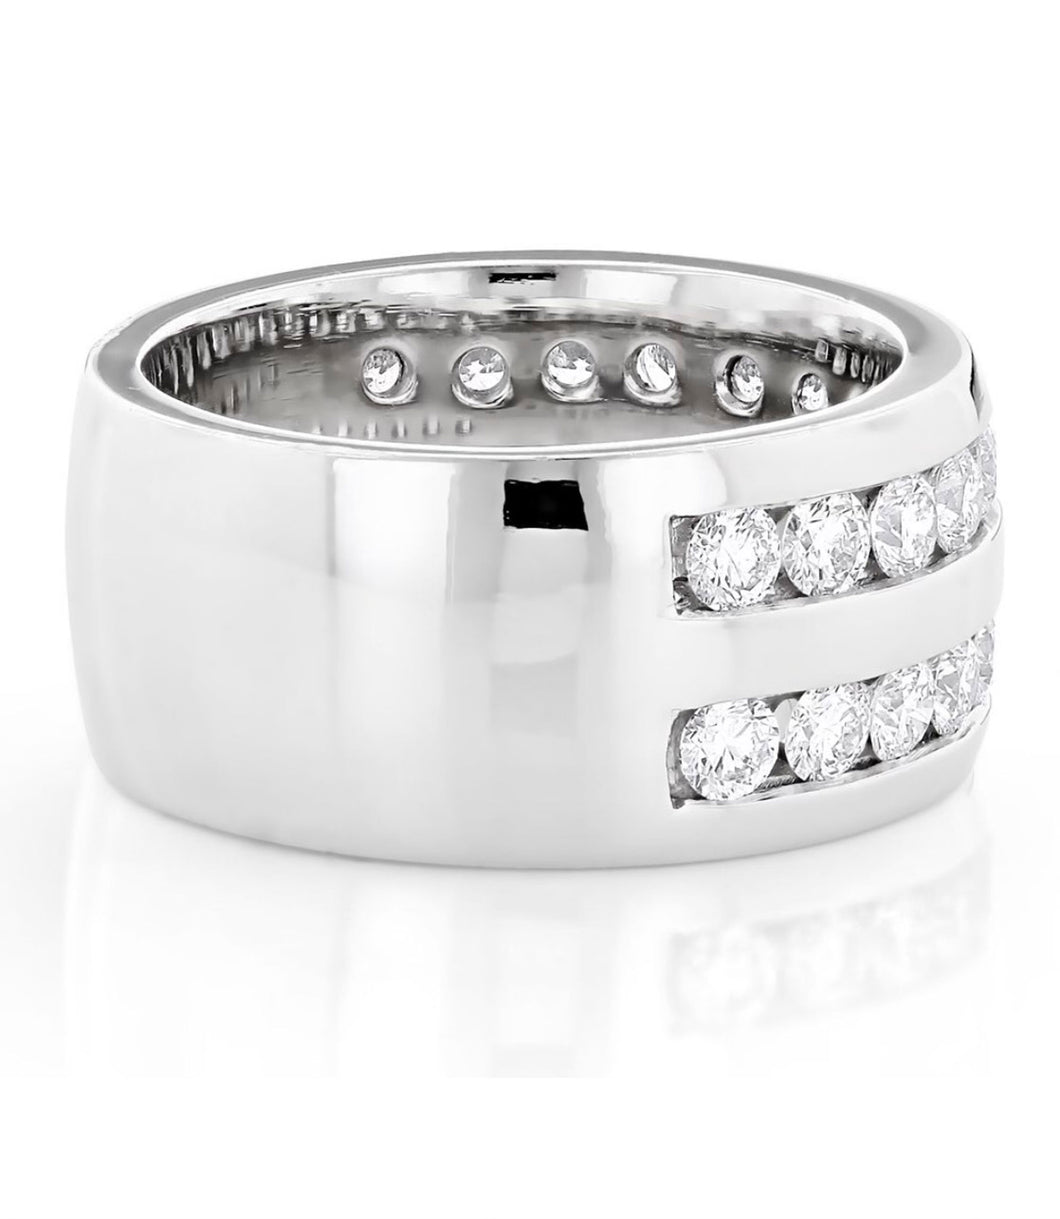 Men's 14K Solid And Heavy White Gold Round Cut Natural Diamonds Ring Band channel Set Style 2.00ctw